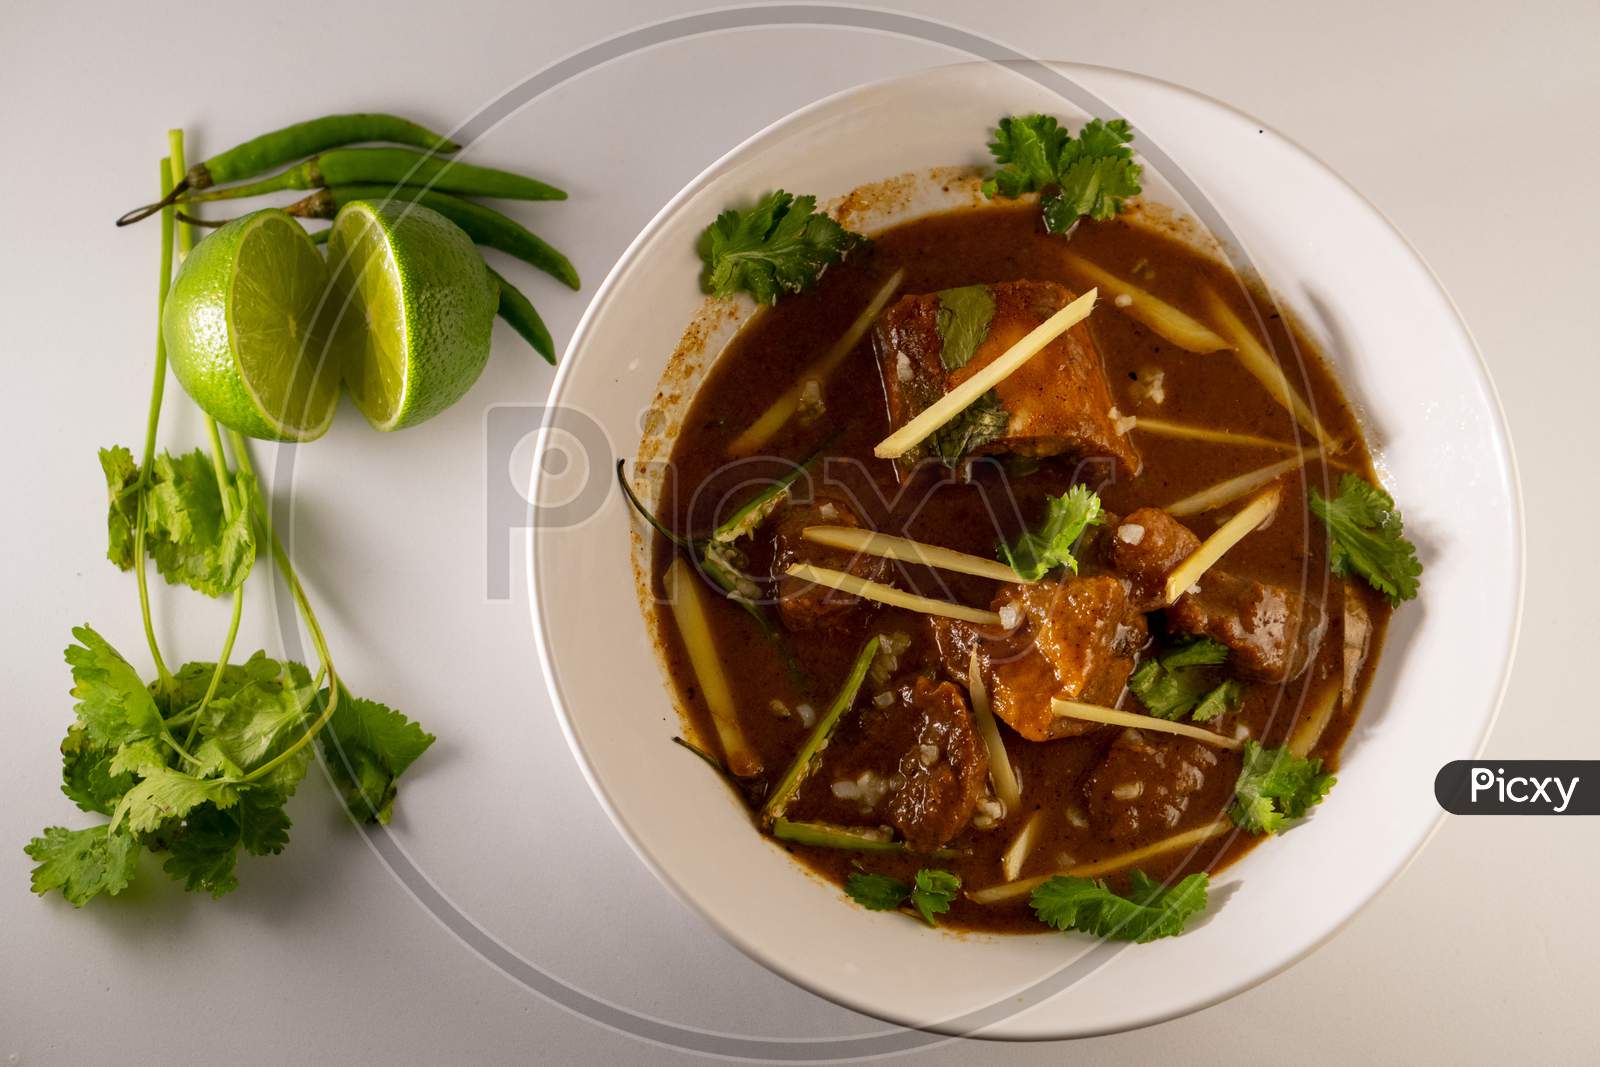 Top View of Mouth watering Beef Nihari Served with lemon, ginger, coriander and green chilli.